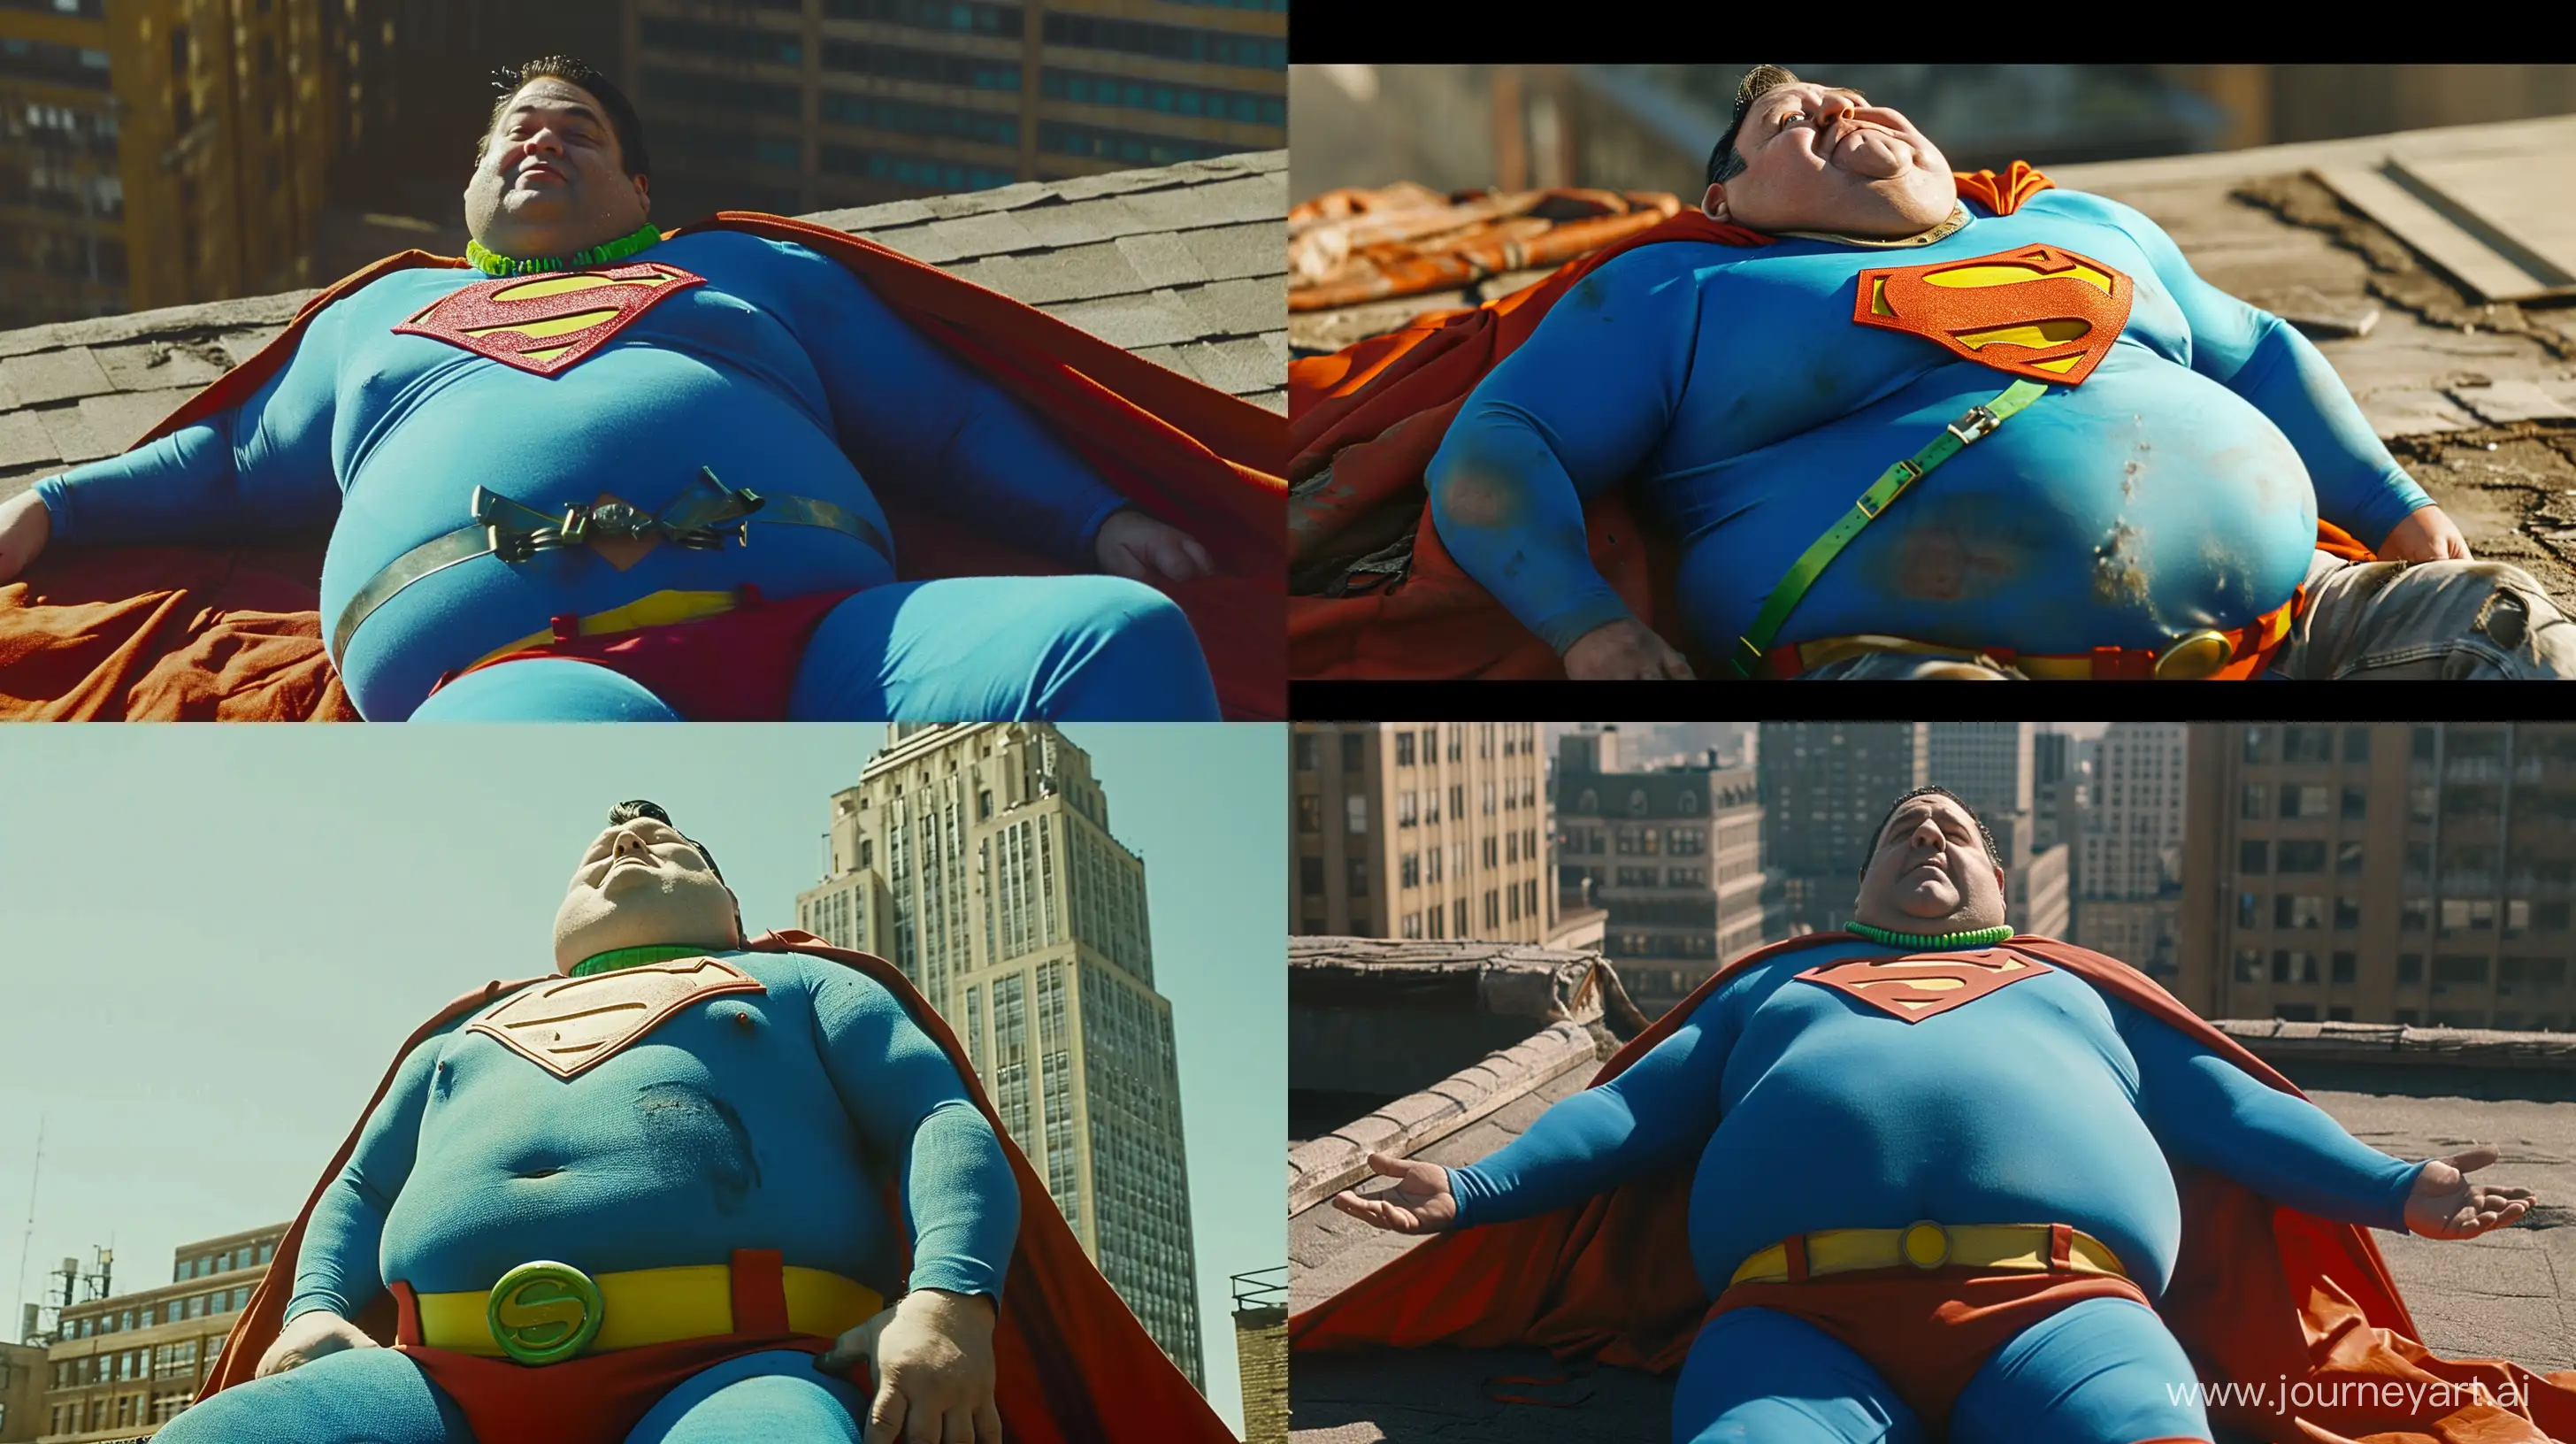 Cheerful-Superman-Lounging-on-Rooftop-Under-the-Sun-with-a-Dreamlike-Vibe